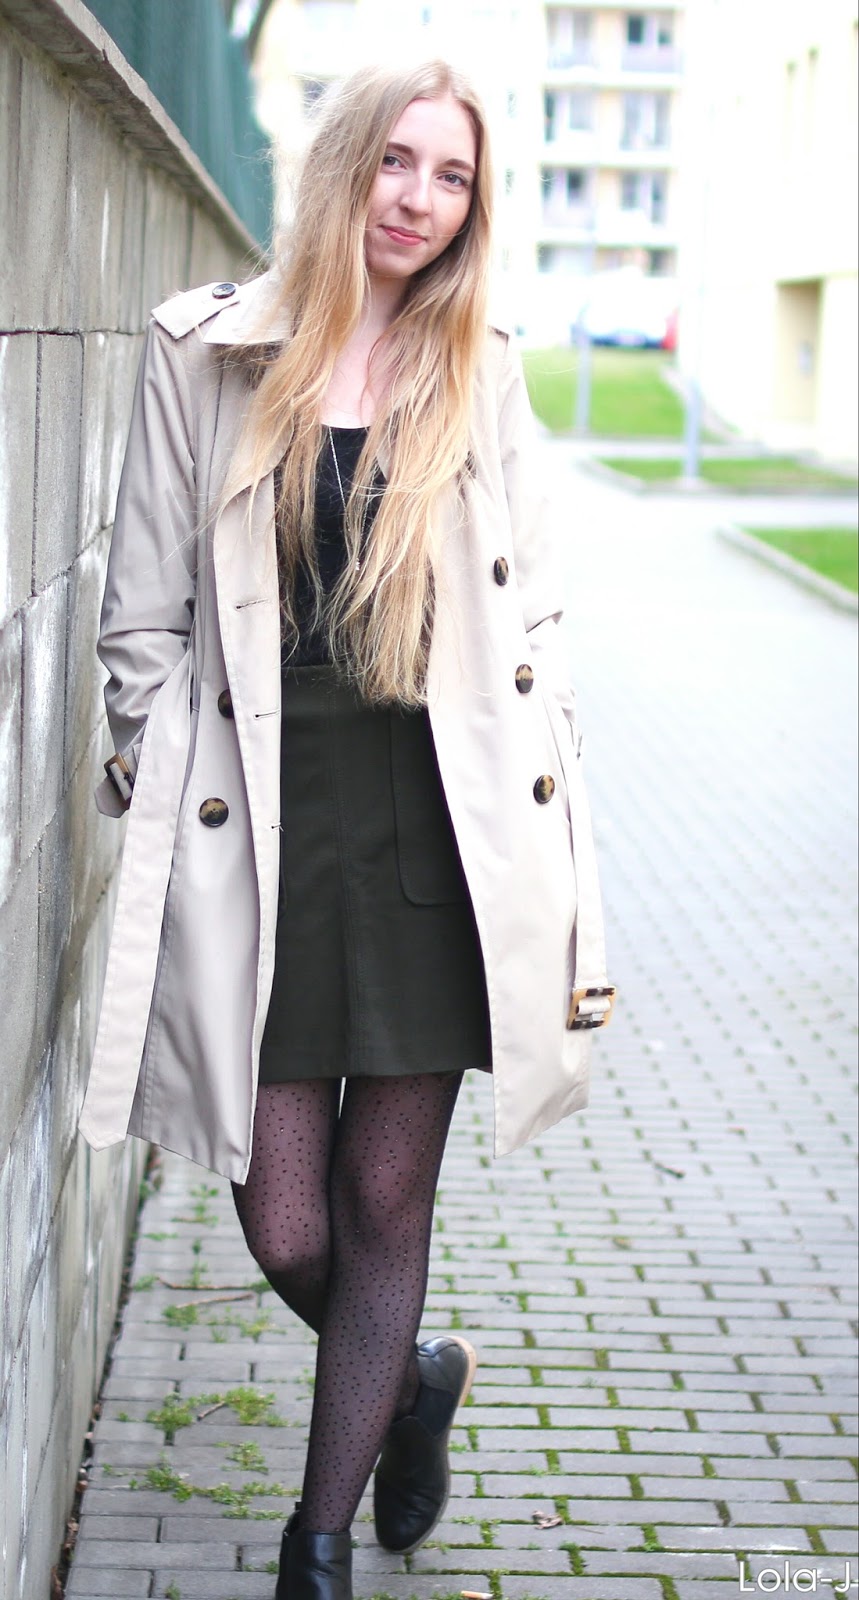 Style eclectic lola-j.cz - Fashionmylegs : The tights and hosiery blog